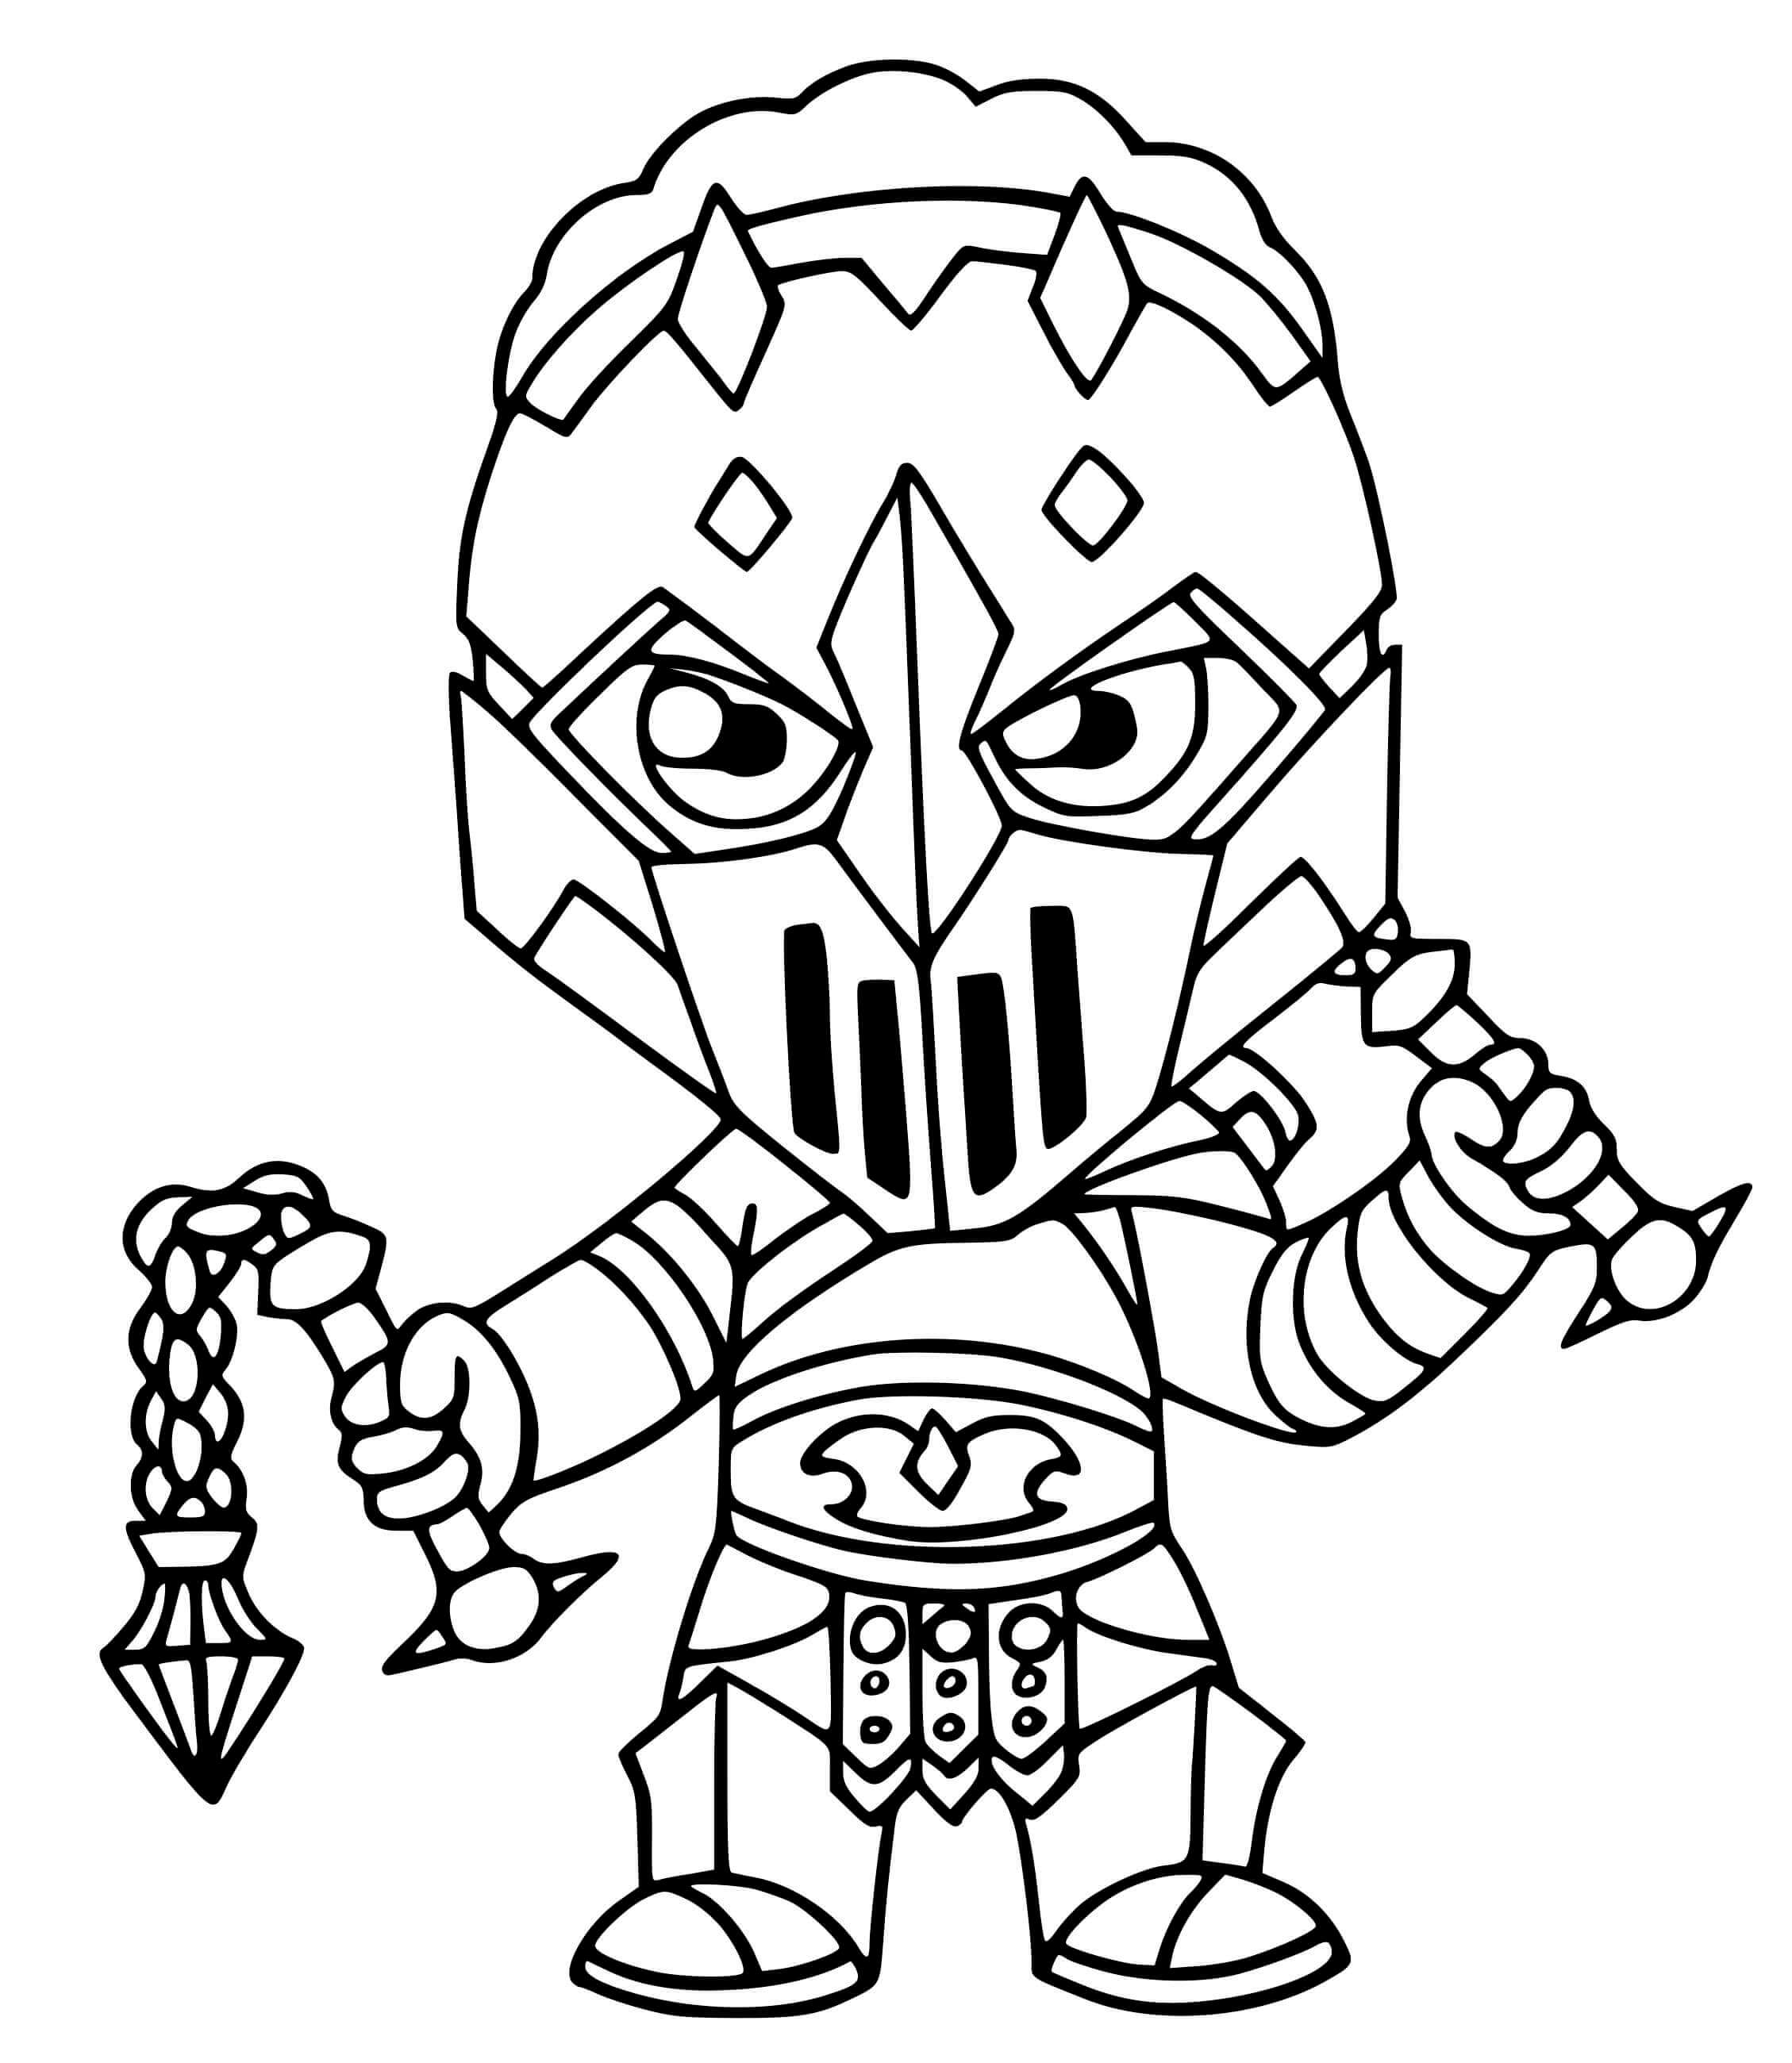 Menace From Fortnite Chapter 2 Season 5 Coloring Page